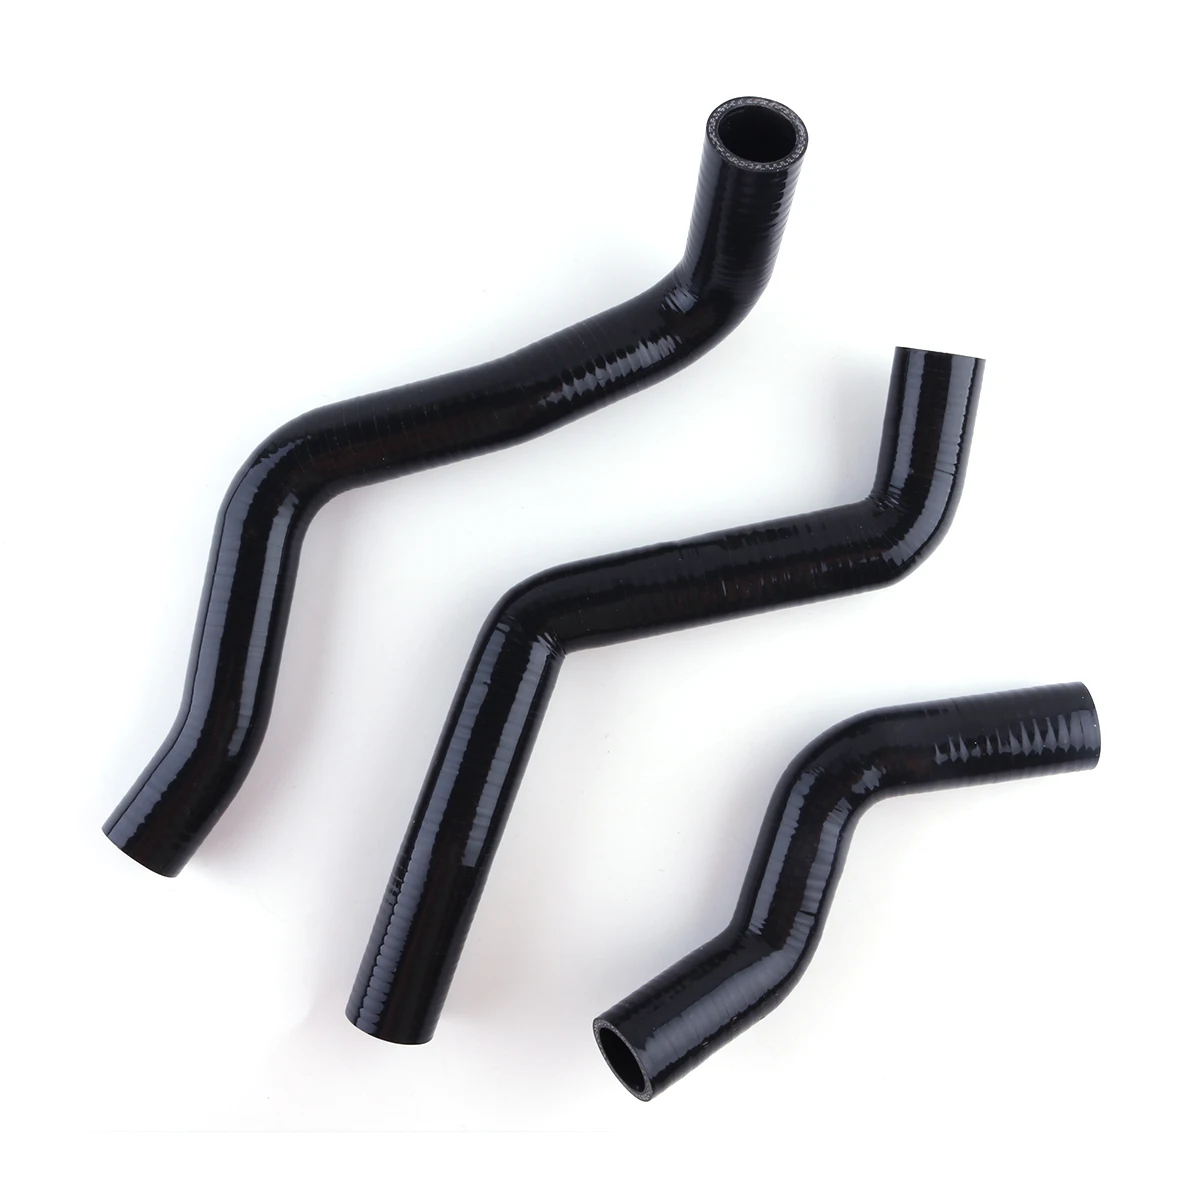 

3PCS Silicone Radiator Hose For 2003-2008 Mazda Rx-8 Rx8 1.3l Se3p 13b-Msp R2 Replacement Parts 2004 2005 2006 2007